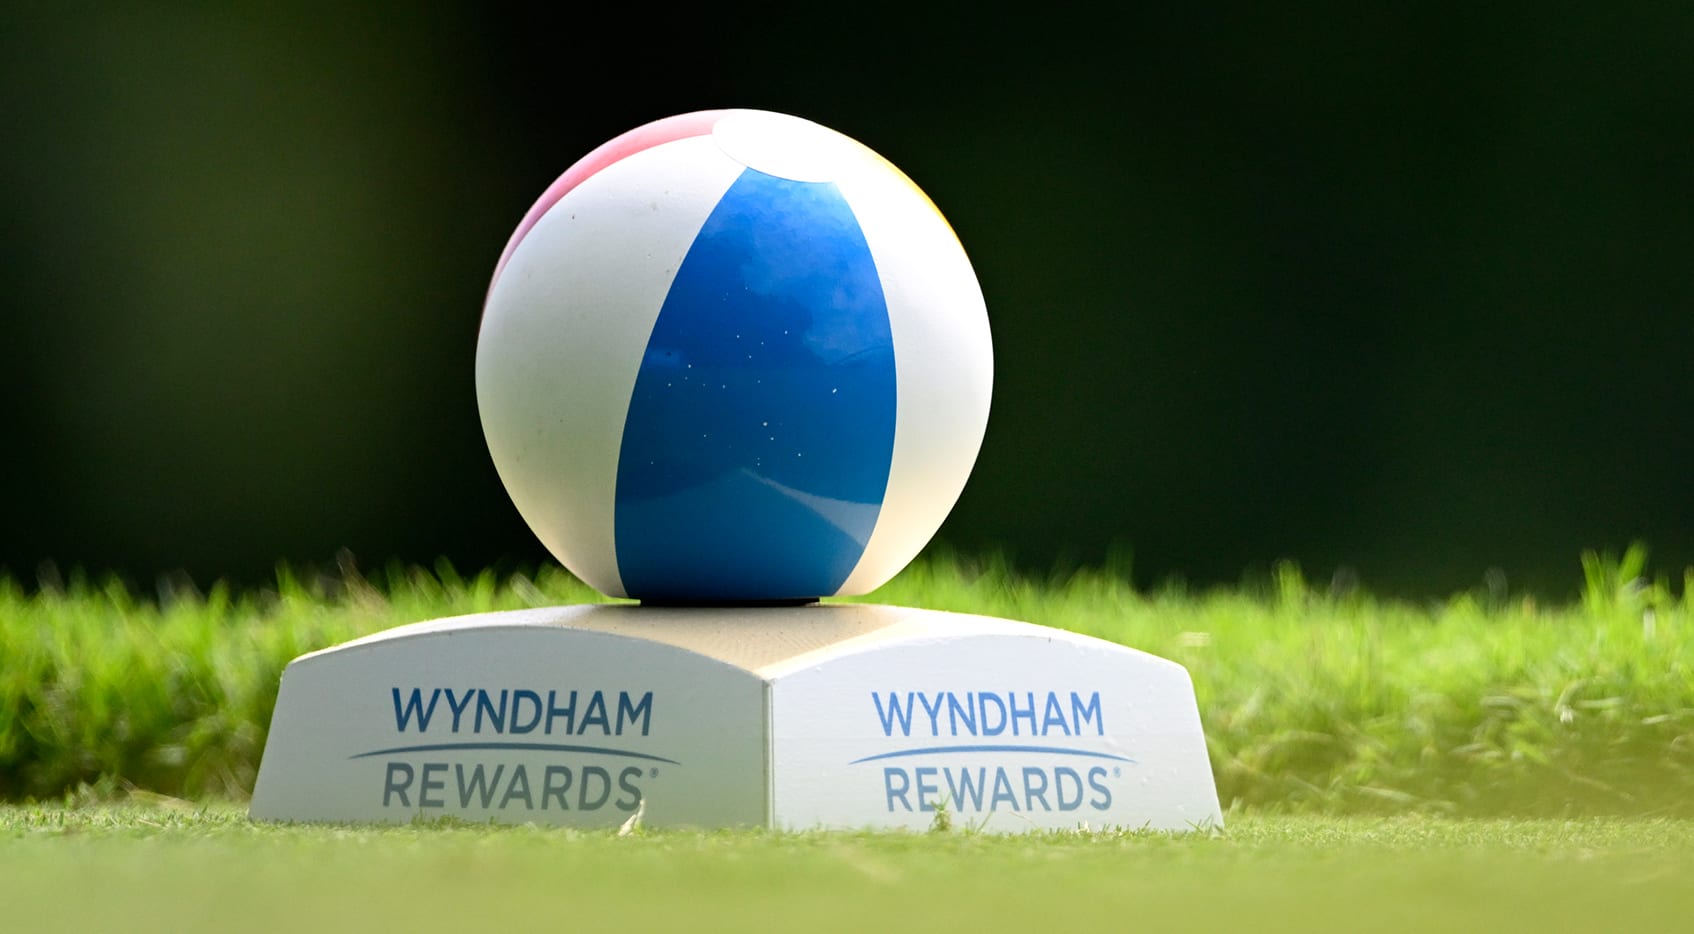 How to Watch the Wyndham Championship, Sunday Featured Groups, live